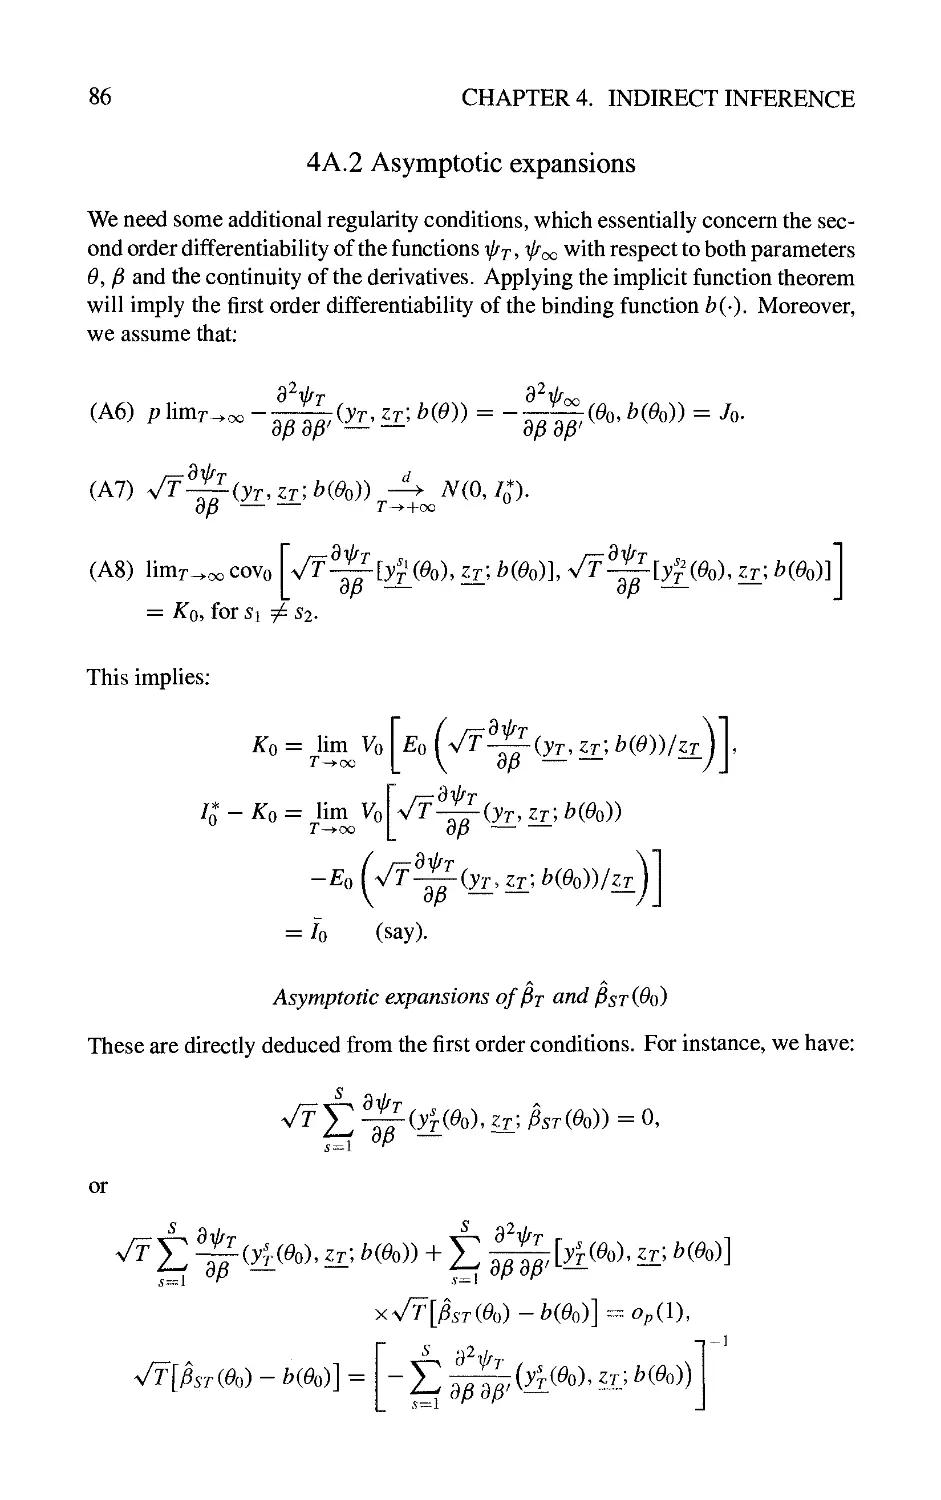 4A.2 Asymptotic expansions